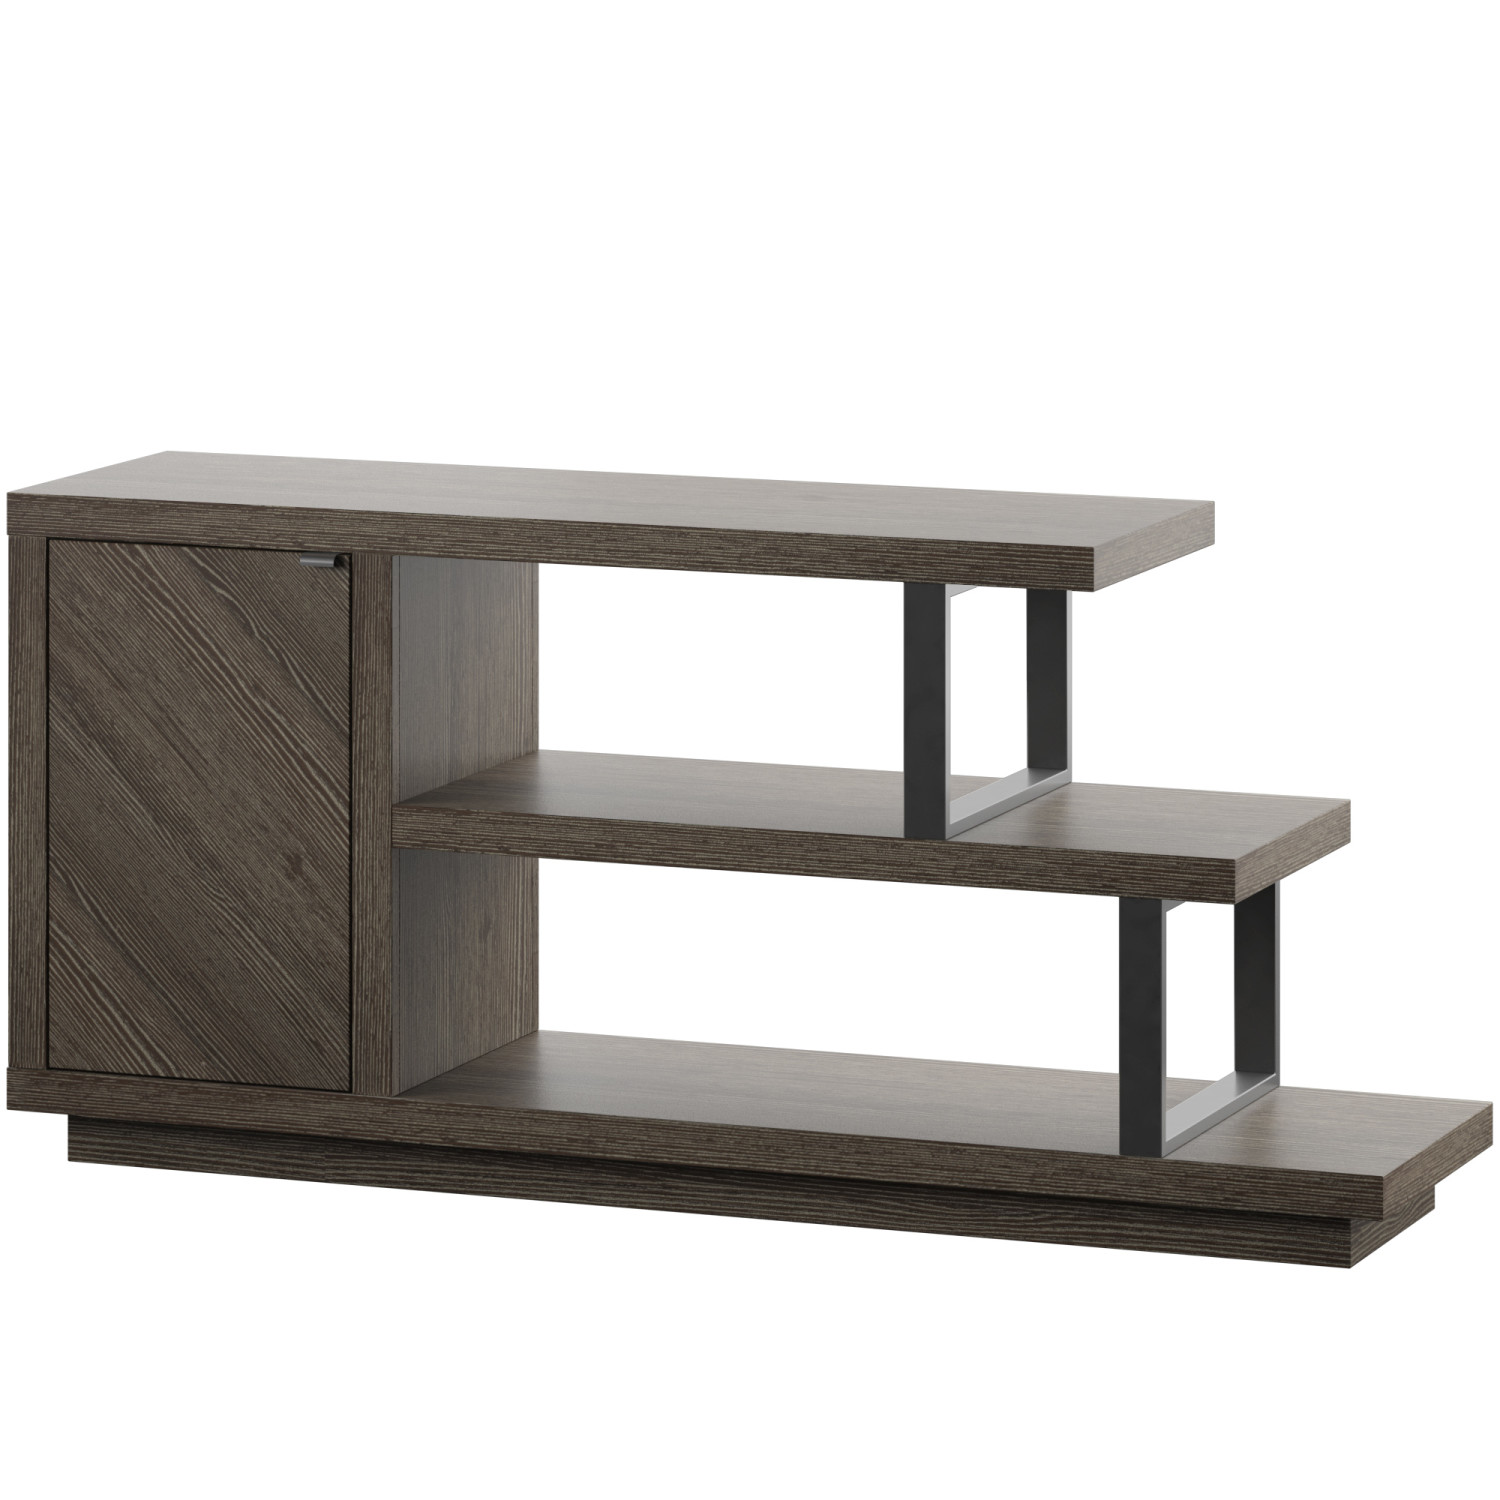 TV Stand for TVs up to 55” with Asymmetrical Shelves in Curtis Oak - image 3 of 14